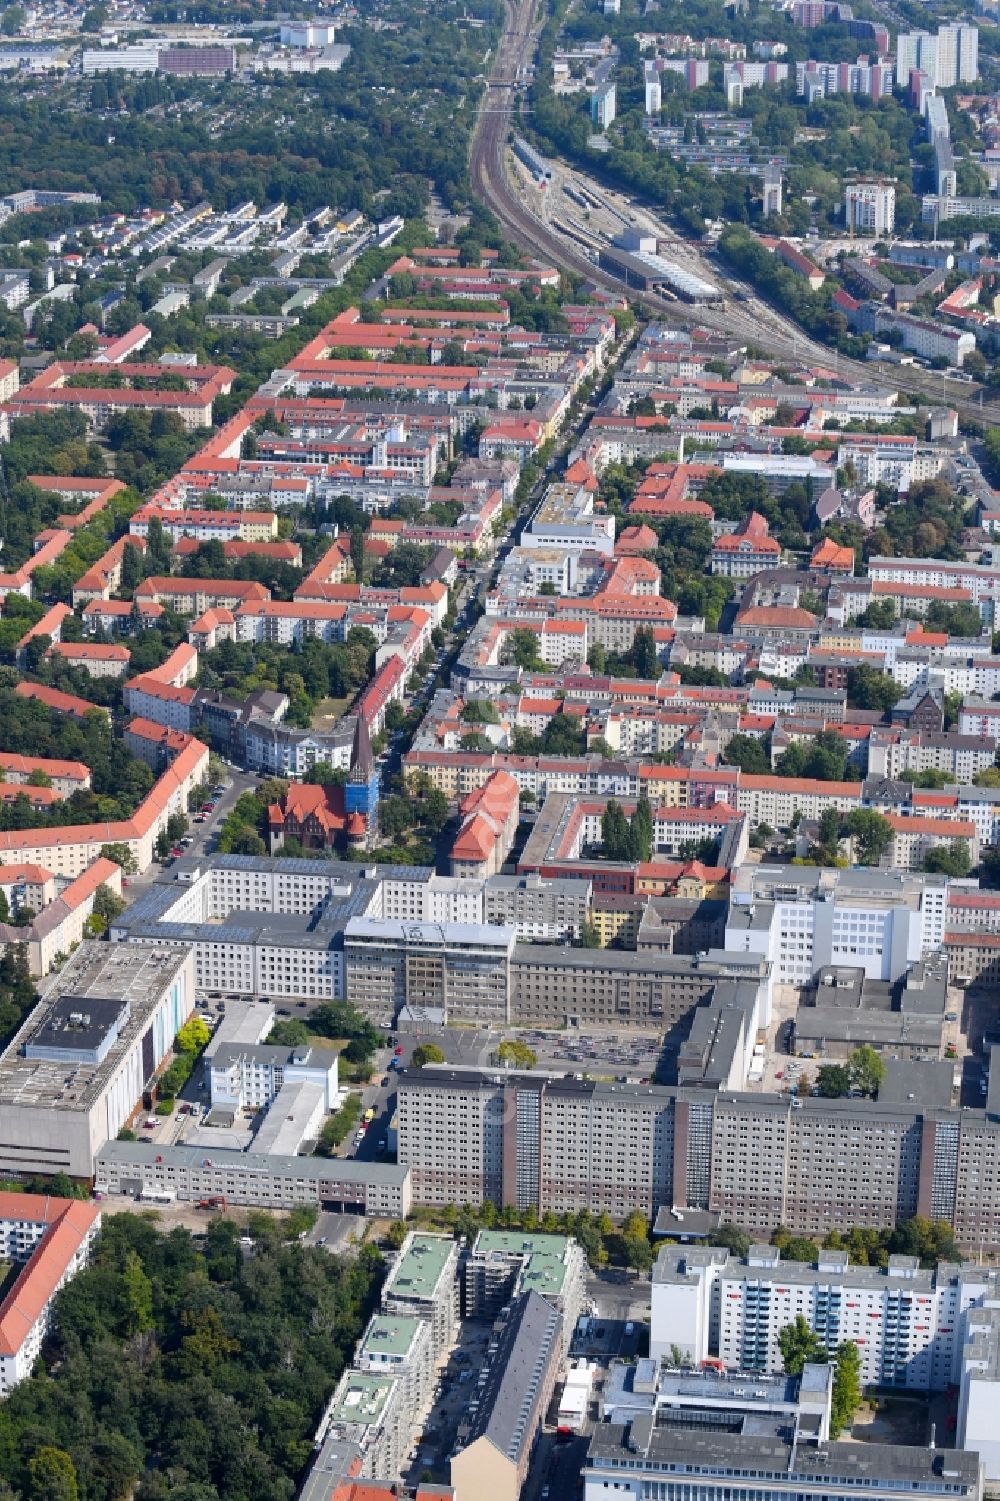 Aerial image Berlin - Building complex of the Memorial of the former Stasi Ministry for State Security of the GDR in the Ruschestrasse in Berlin Lichtenberg